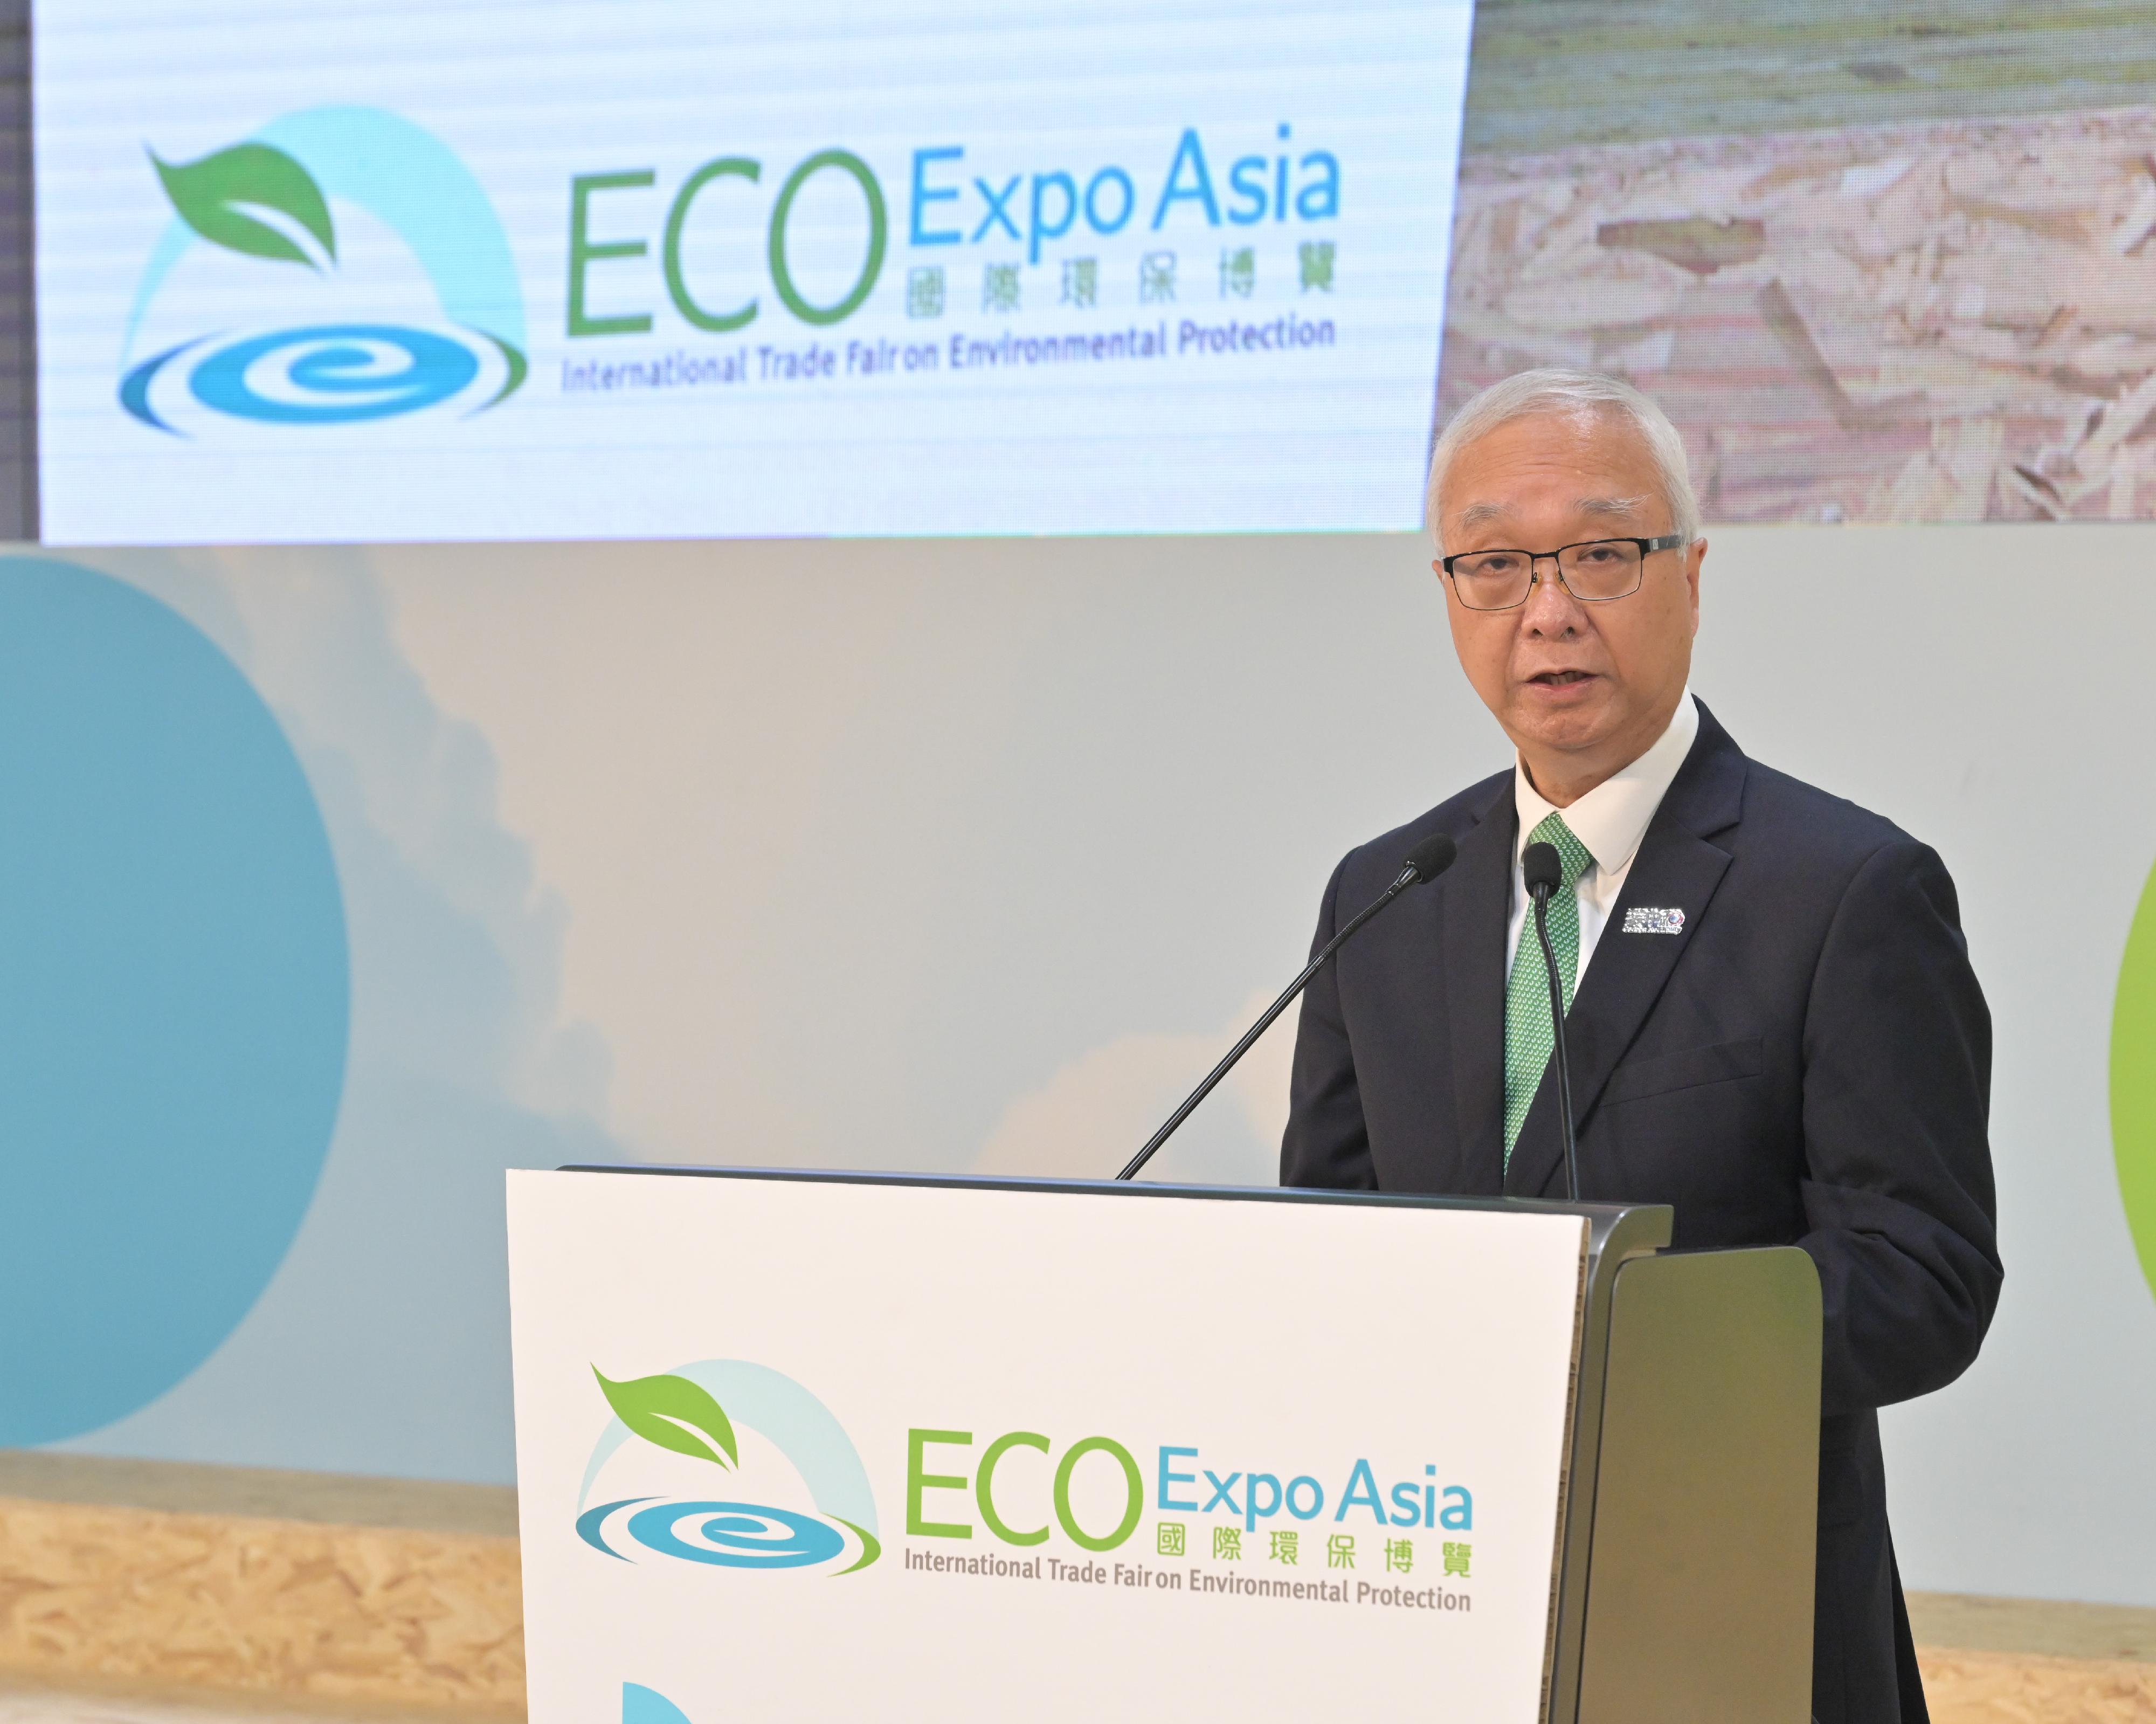 The C40 Climate Action Seminar (Asian and Oceania Regions) was held today (October 27) at the AsiaWorld-Expo. Photo shows the Secretary for Environment and Ecology, Mr Tse Chin-wan, delivering his opening speech at the seminar.